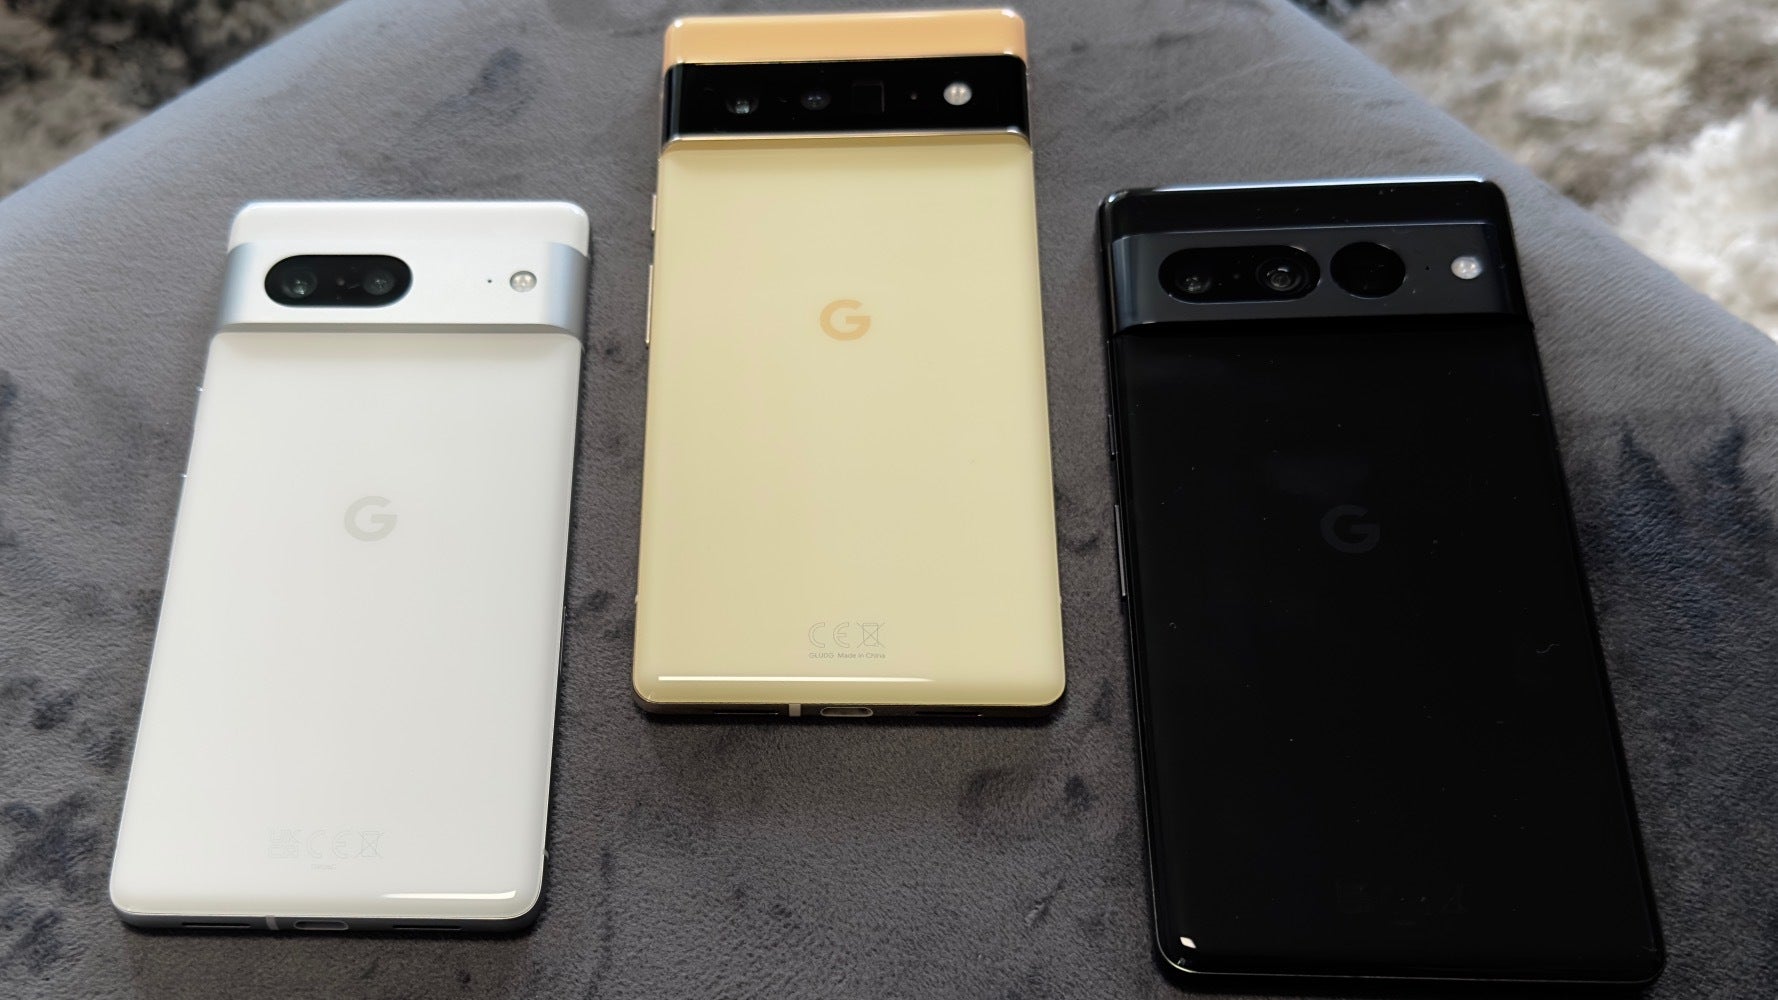 Android's iPhone?  Next joke!  Problems switching to the Pixel 7 make me reconsider Google's promises